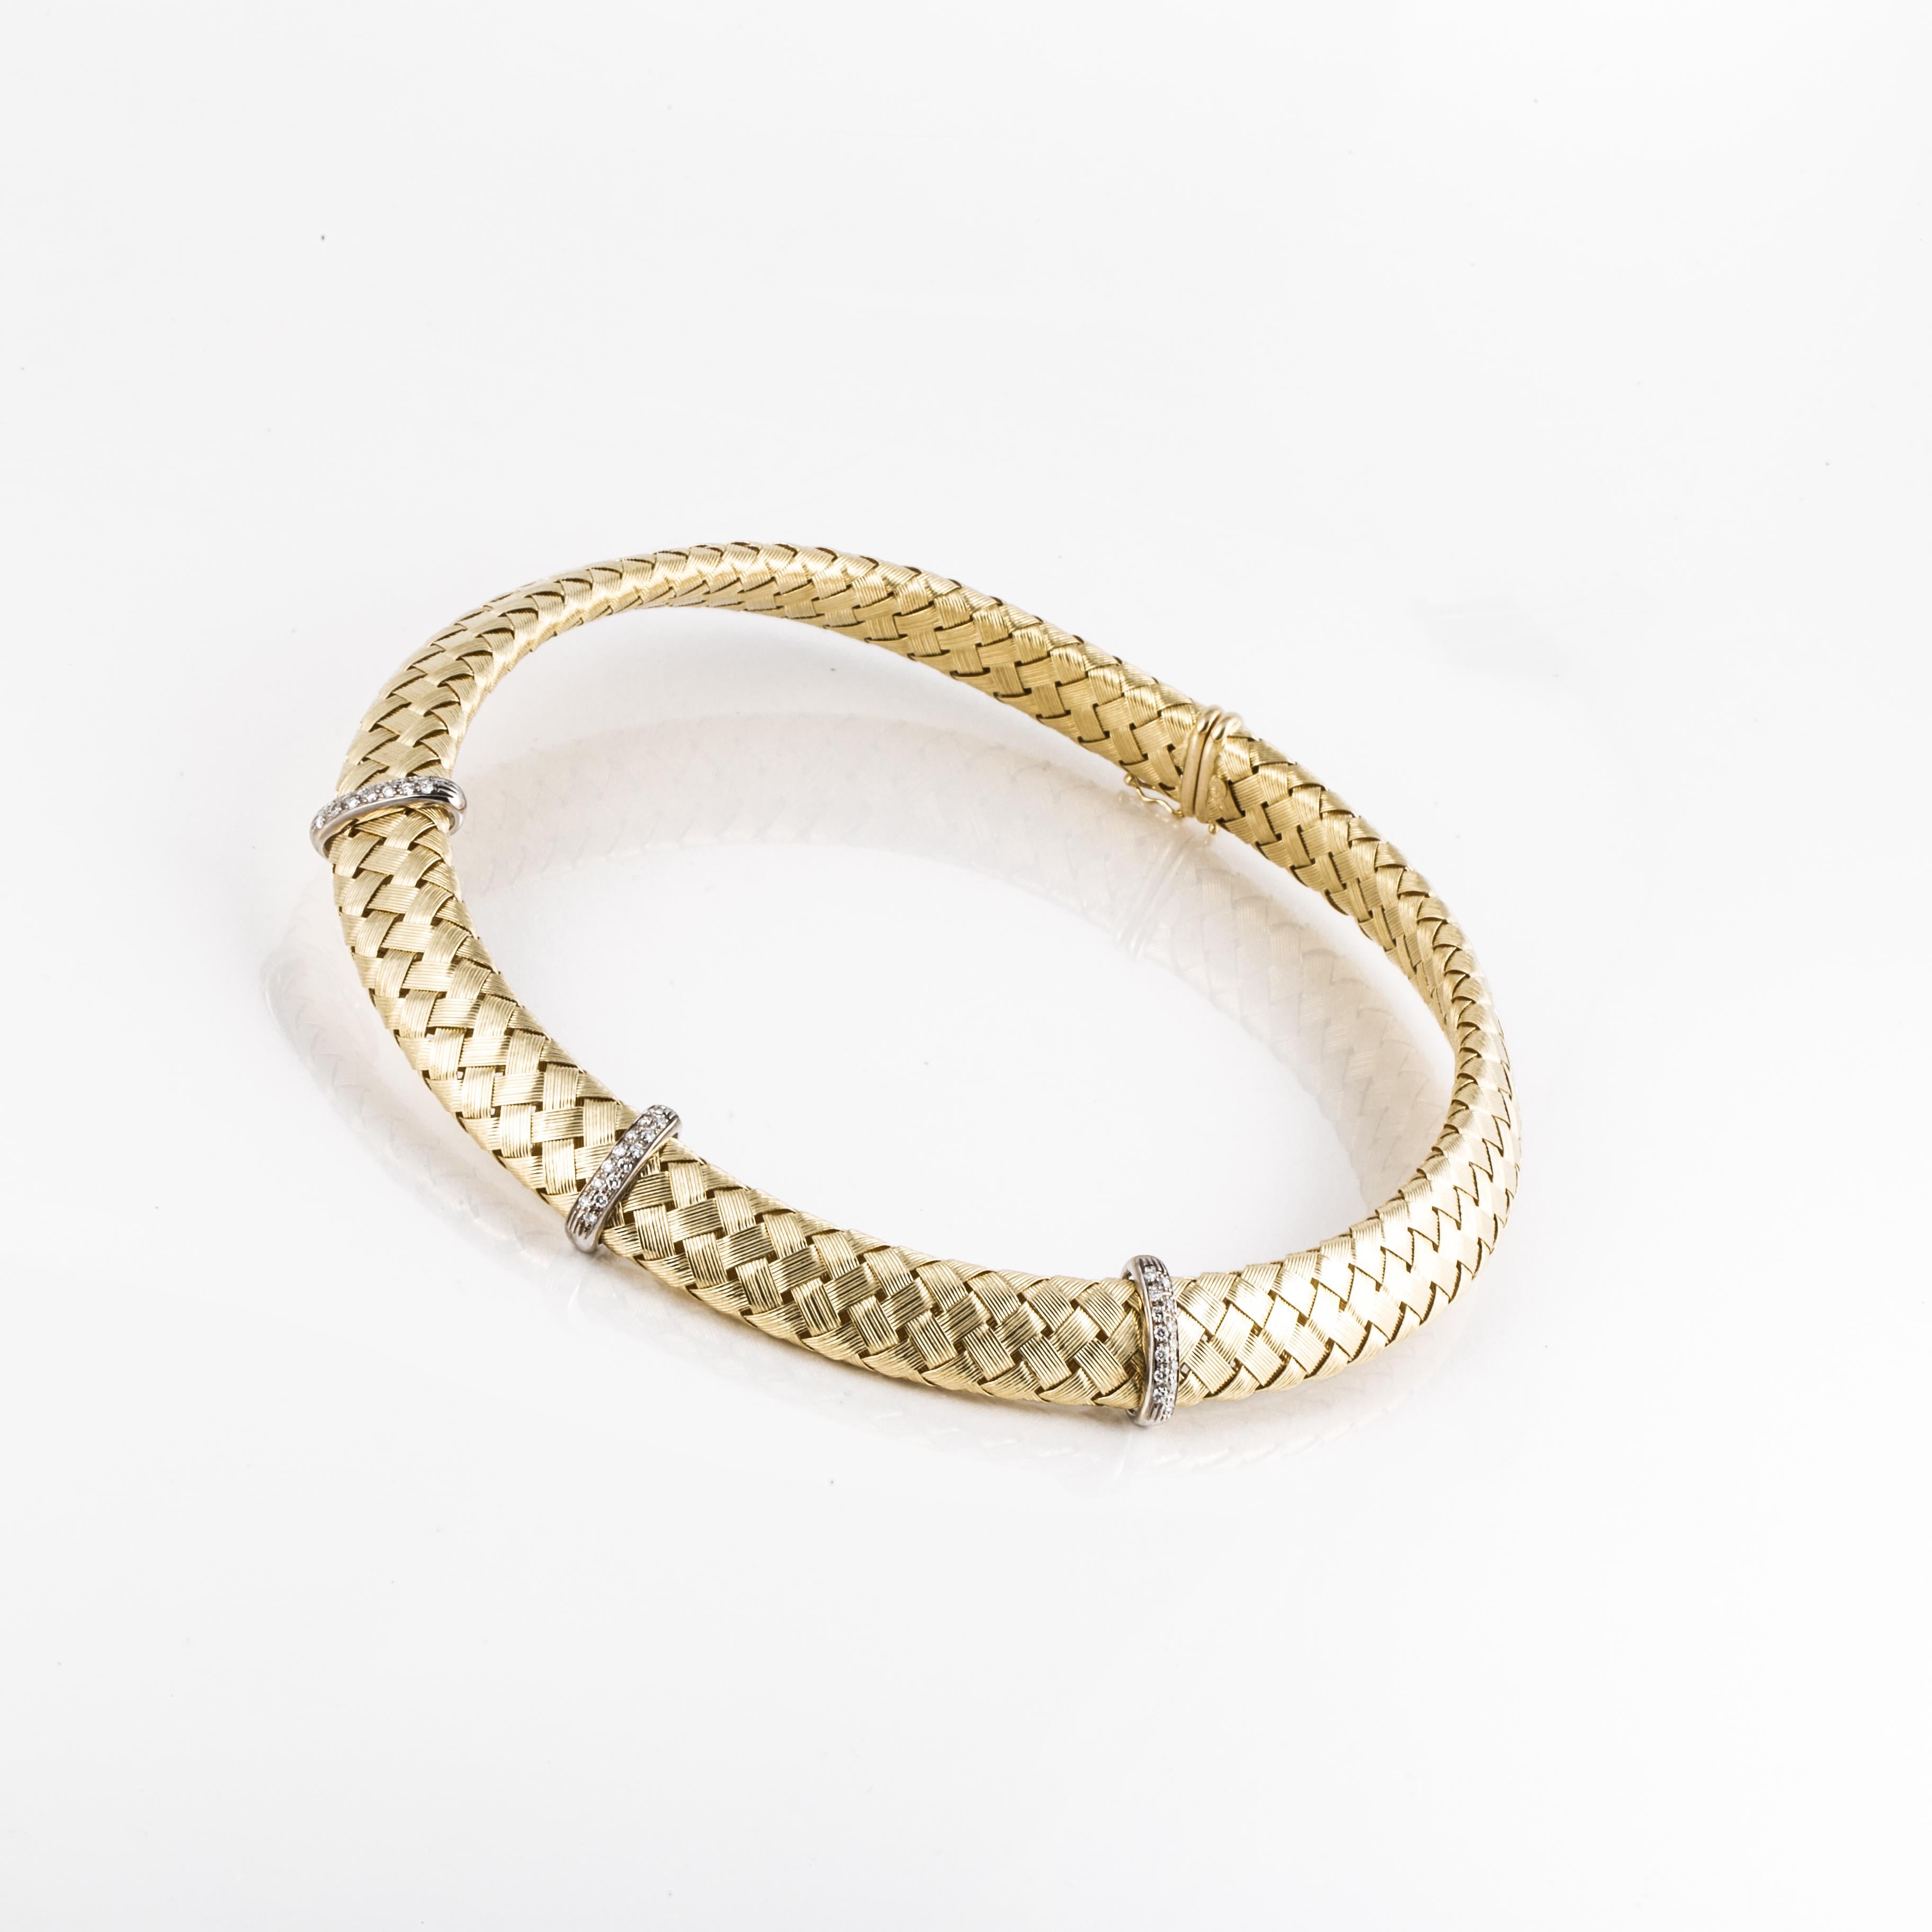 Classic style woven choker necklace by Roberto Coin.  It is 18K yellow gold with three plaques of diamonds set in white gold.  There are forty-two (42) round diamonds with total carat weight of 0.80; they are G-H in color and VS in clarity. 